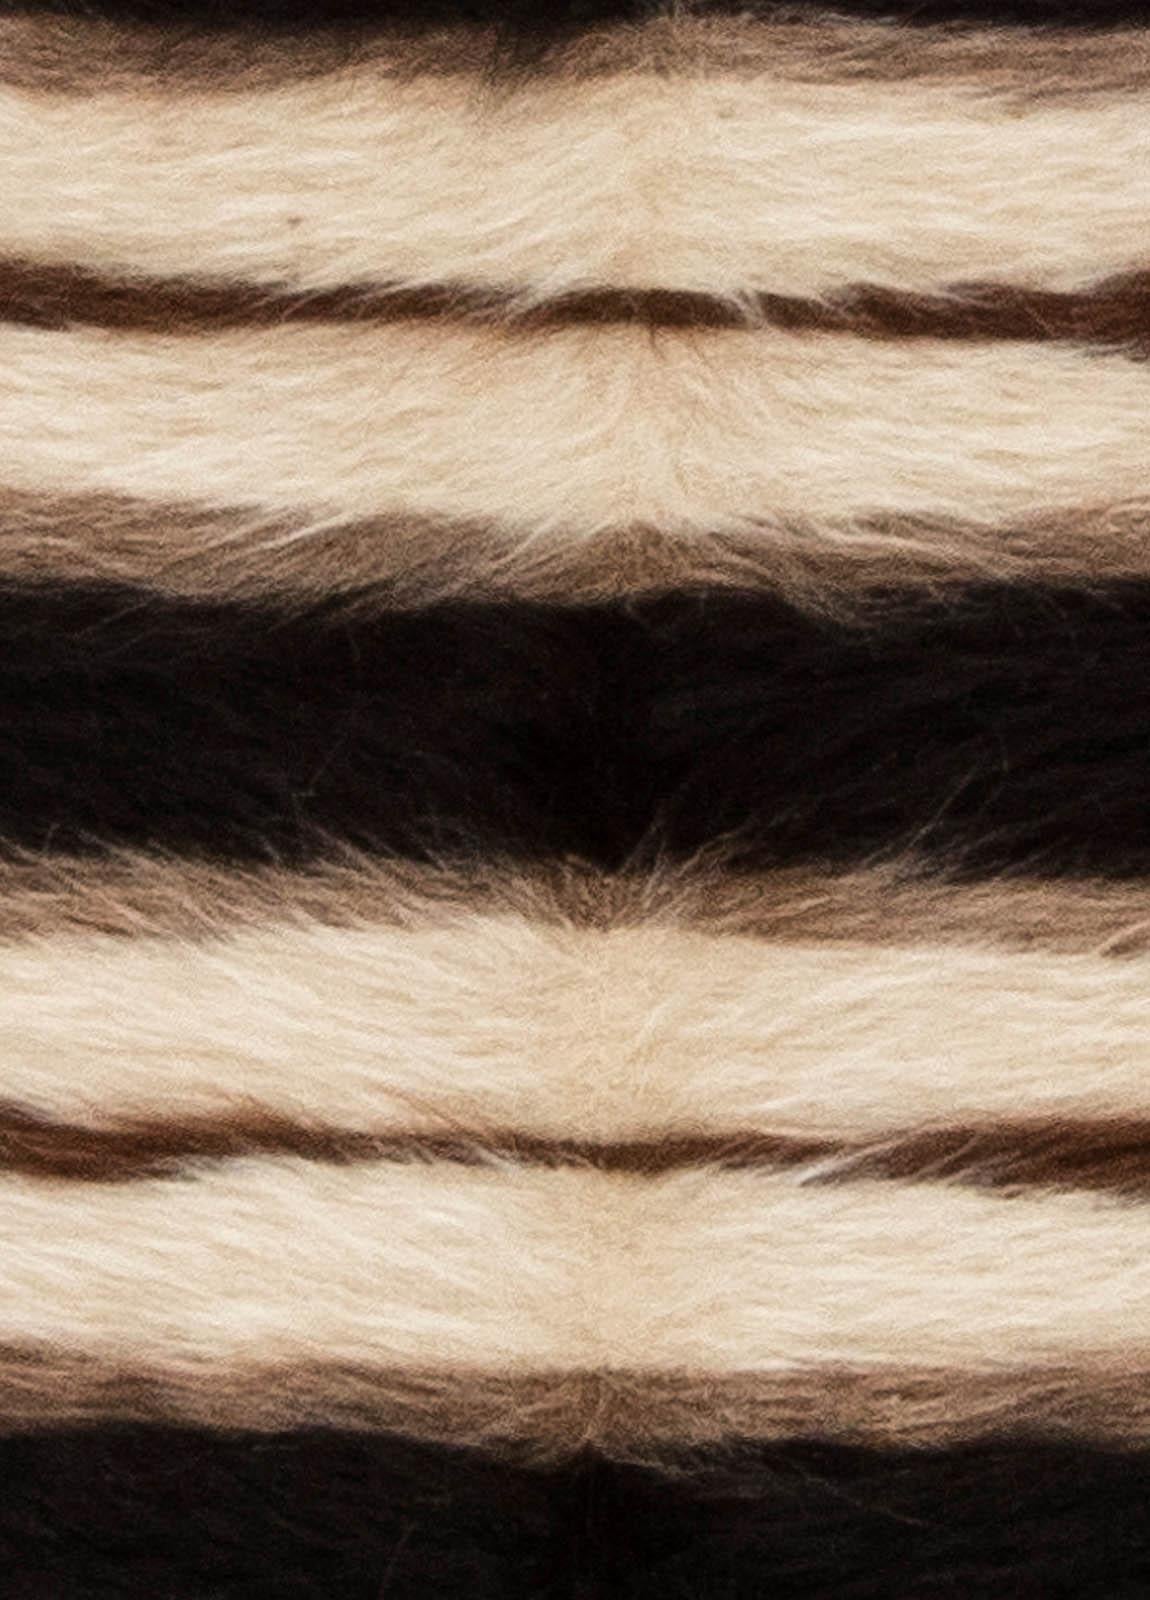 Taurus Collection striped brown, white and black goat hair rug by Doris Leslie Blau.
Size: 2.10